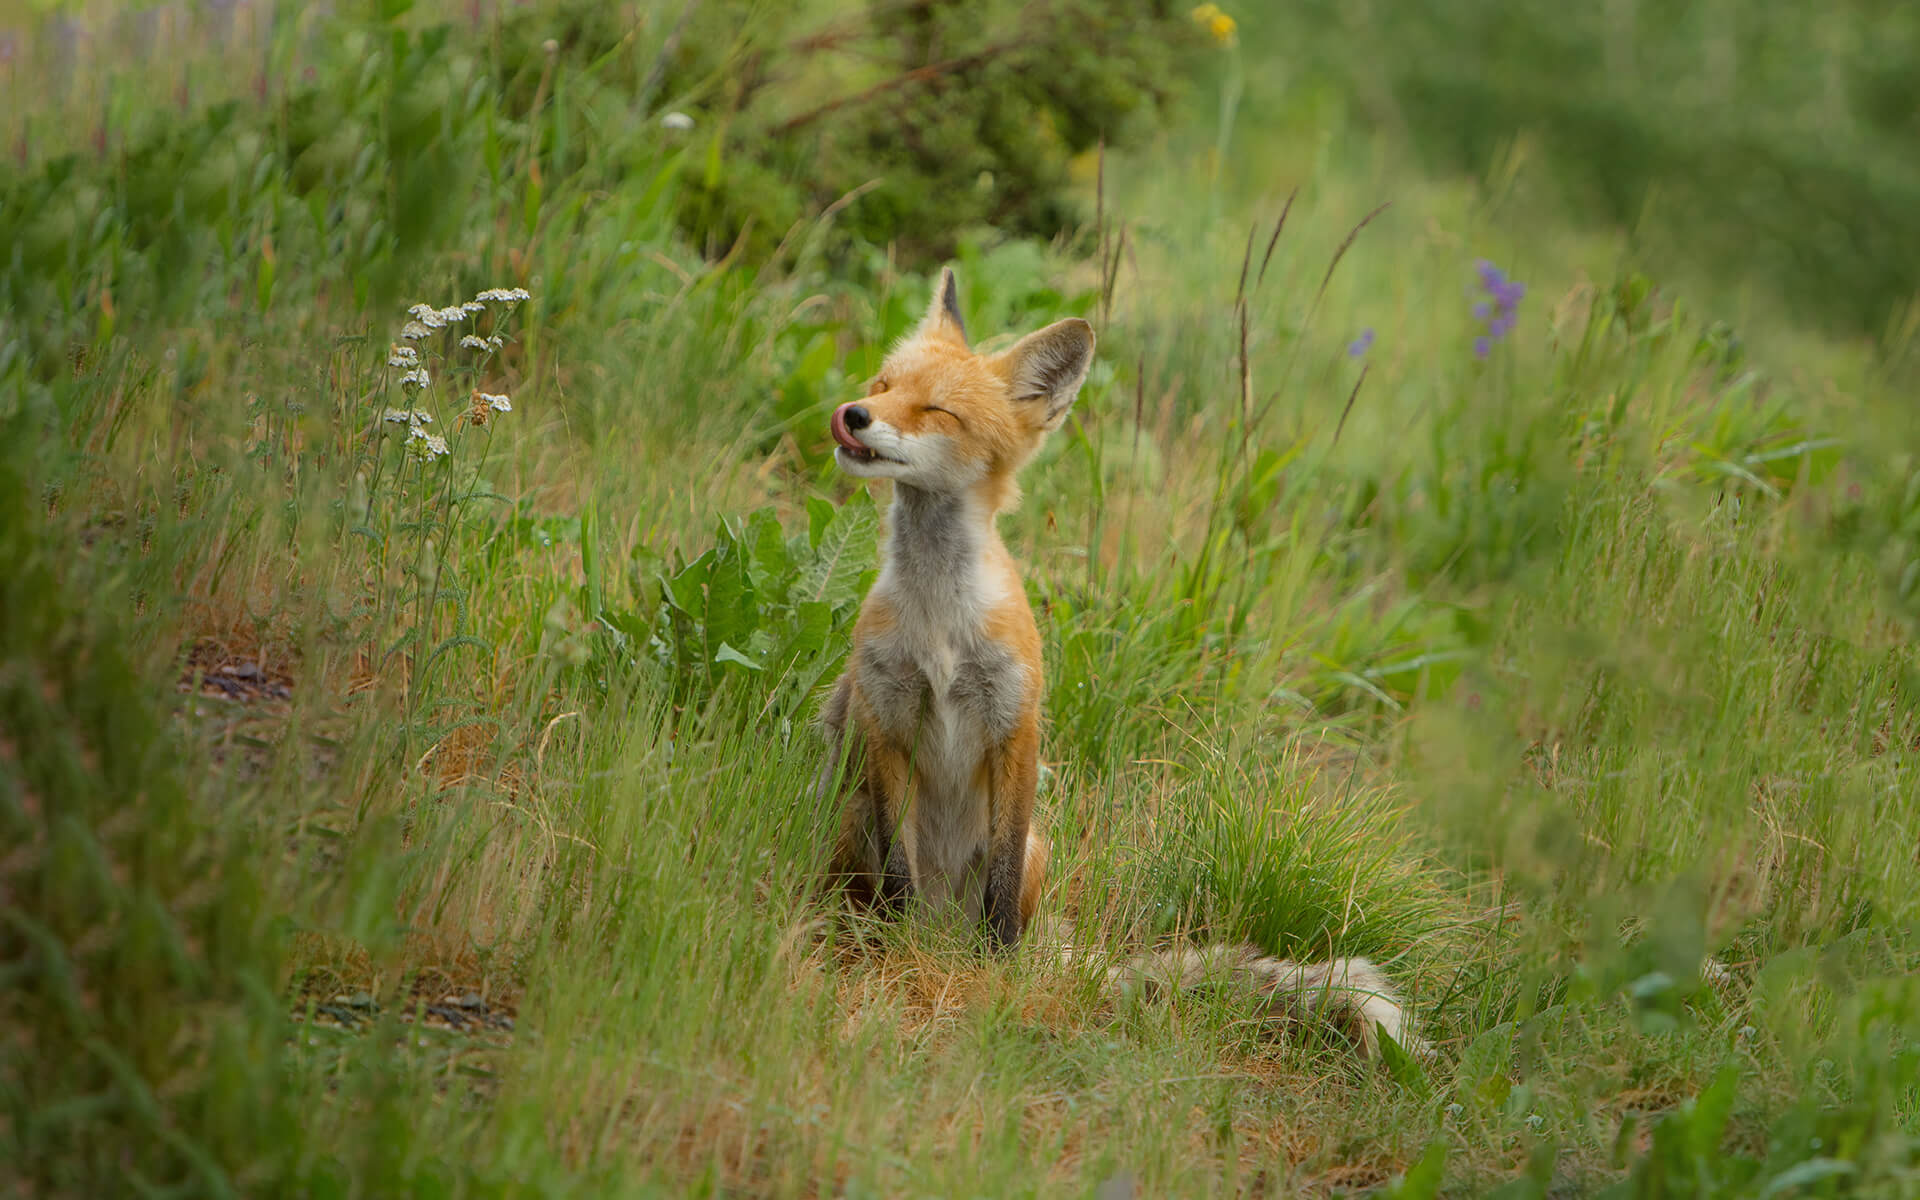 A happy fox licking his lips in a field in Silverthorne, United States.